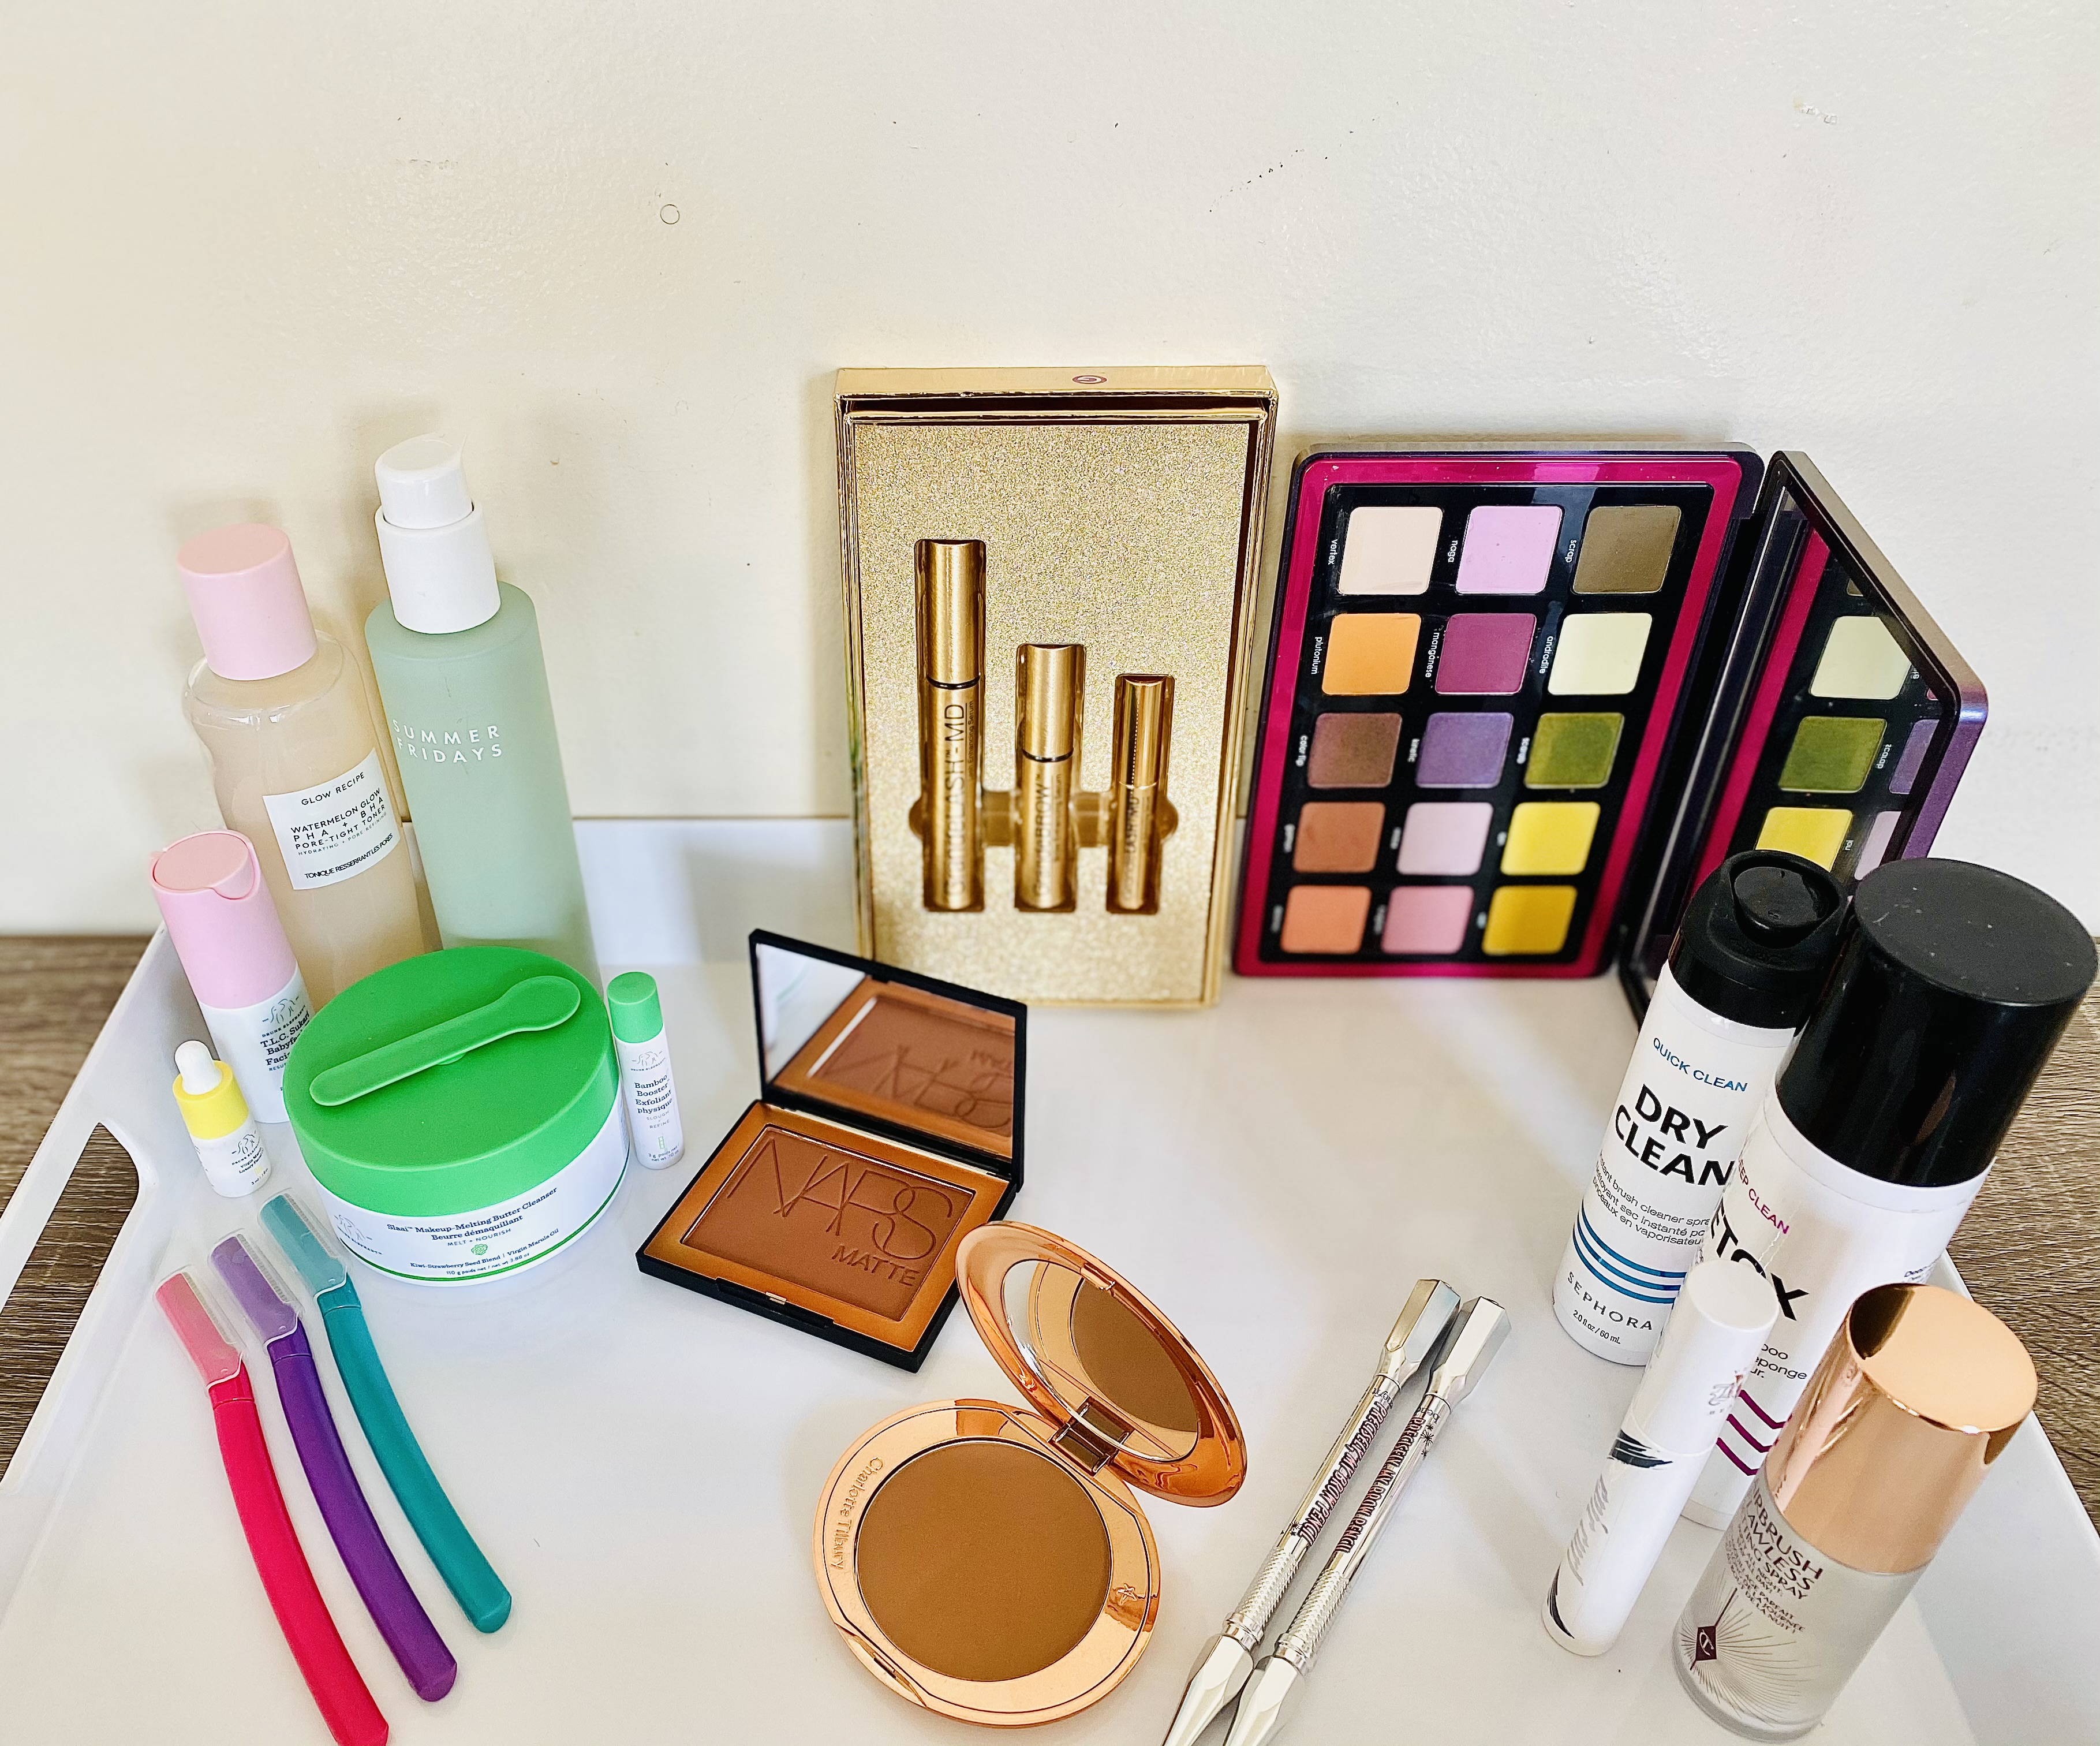 I May Have Gone Overboard and I Don’t Regret It: Sephora VIB Event Haul & Recommendations